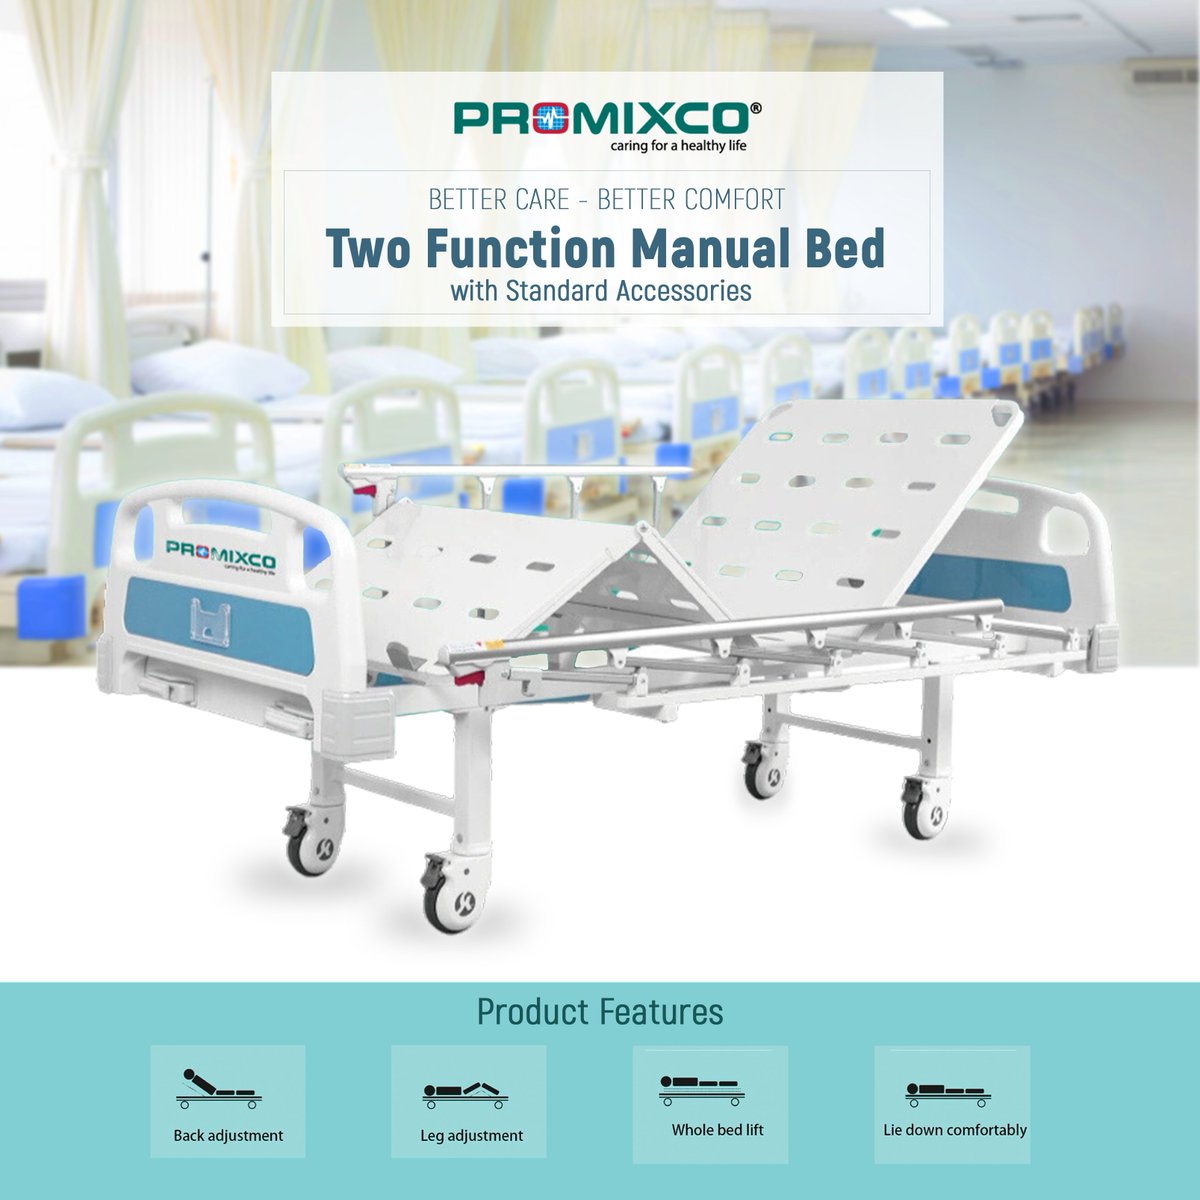 Two-Function Manual Hospital Bed

✅ Adjustable Height
✅ Collapsible cranks.
✅ ABS plastic head & leg panel.
✅ 100mm diameter noiseless luxurious silent castors with individual braking systems.

#Hospitalbed  #Promixco